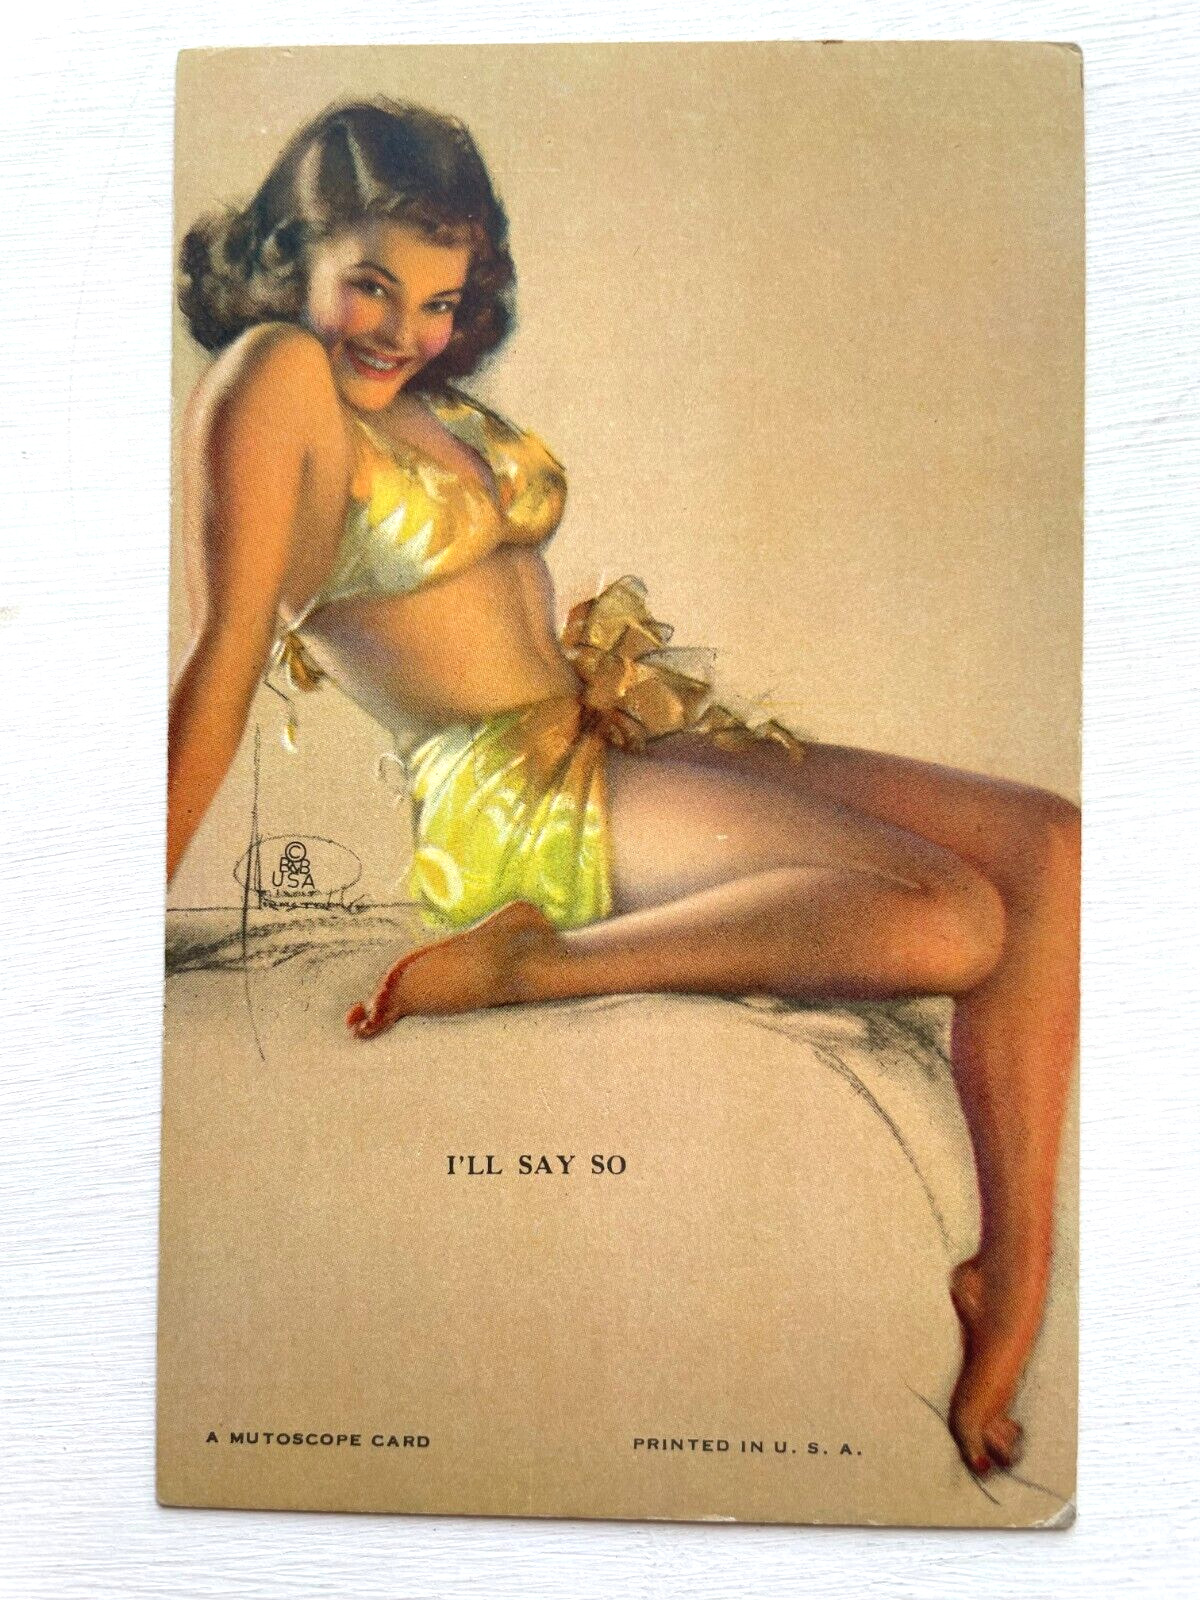 1940's Pinup Girl Picture Mutoscope Card by KO Munsen- I'll Say So